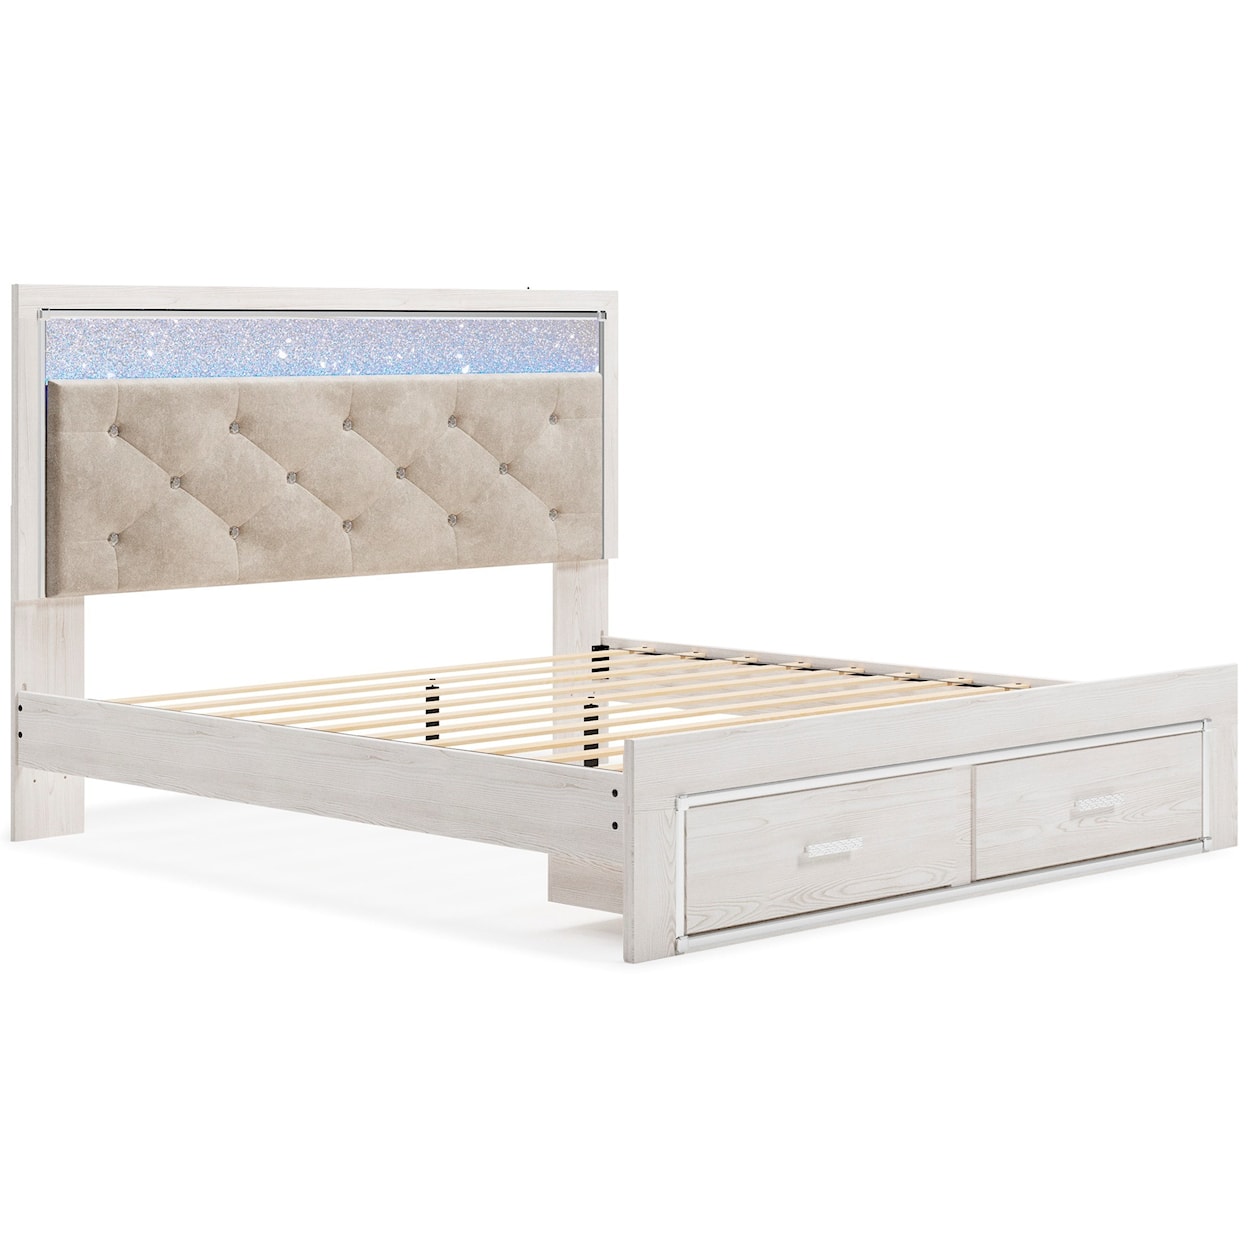 Benchcraft Altyra King Storage Bed with Upholstered Headboard